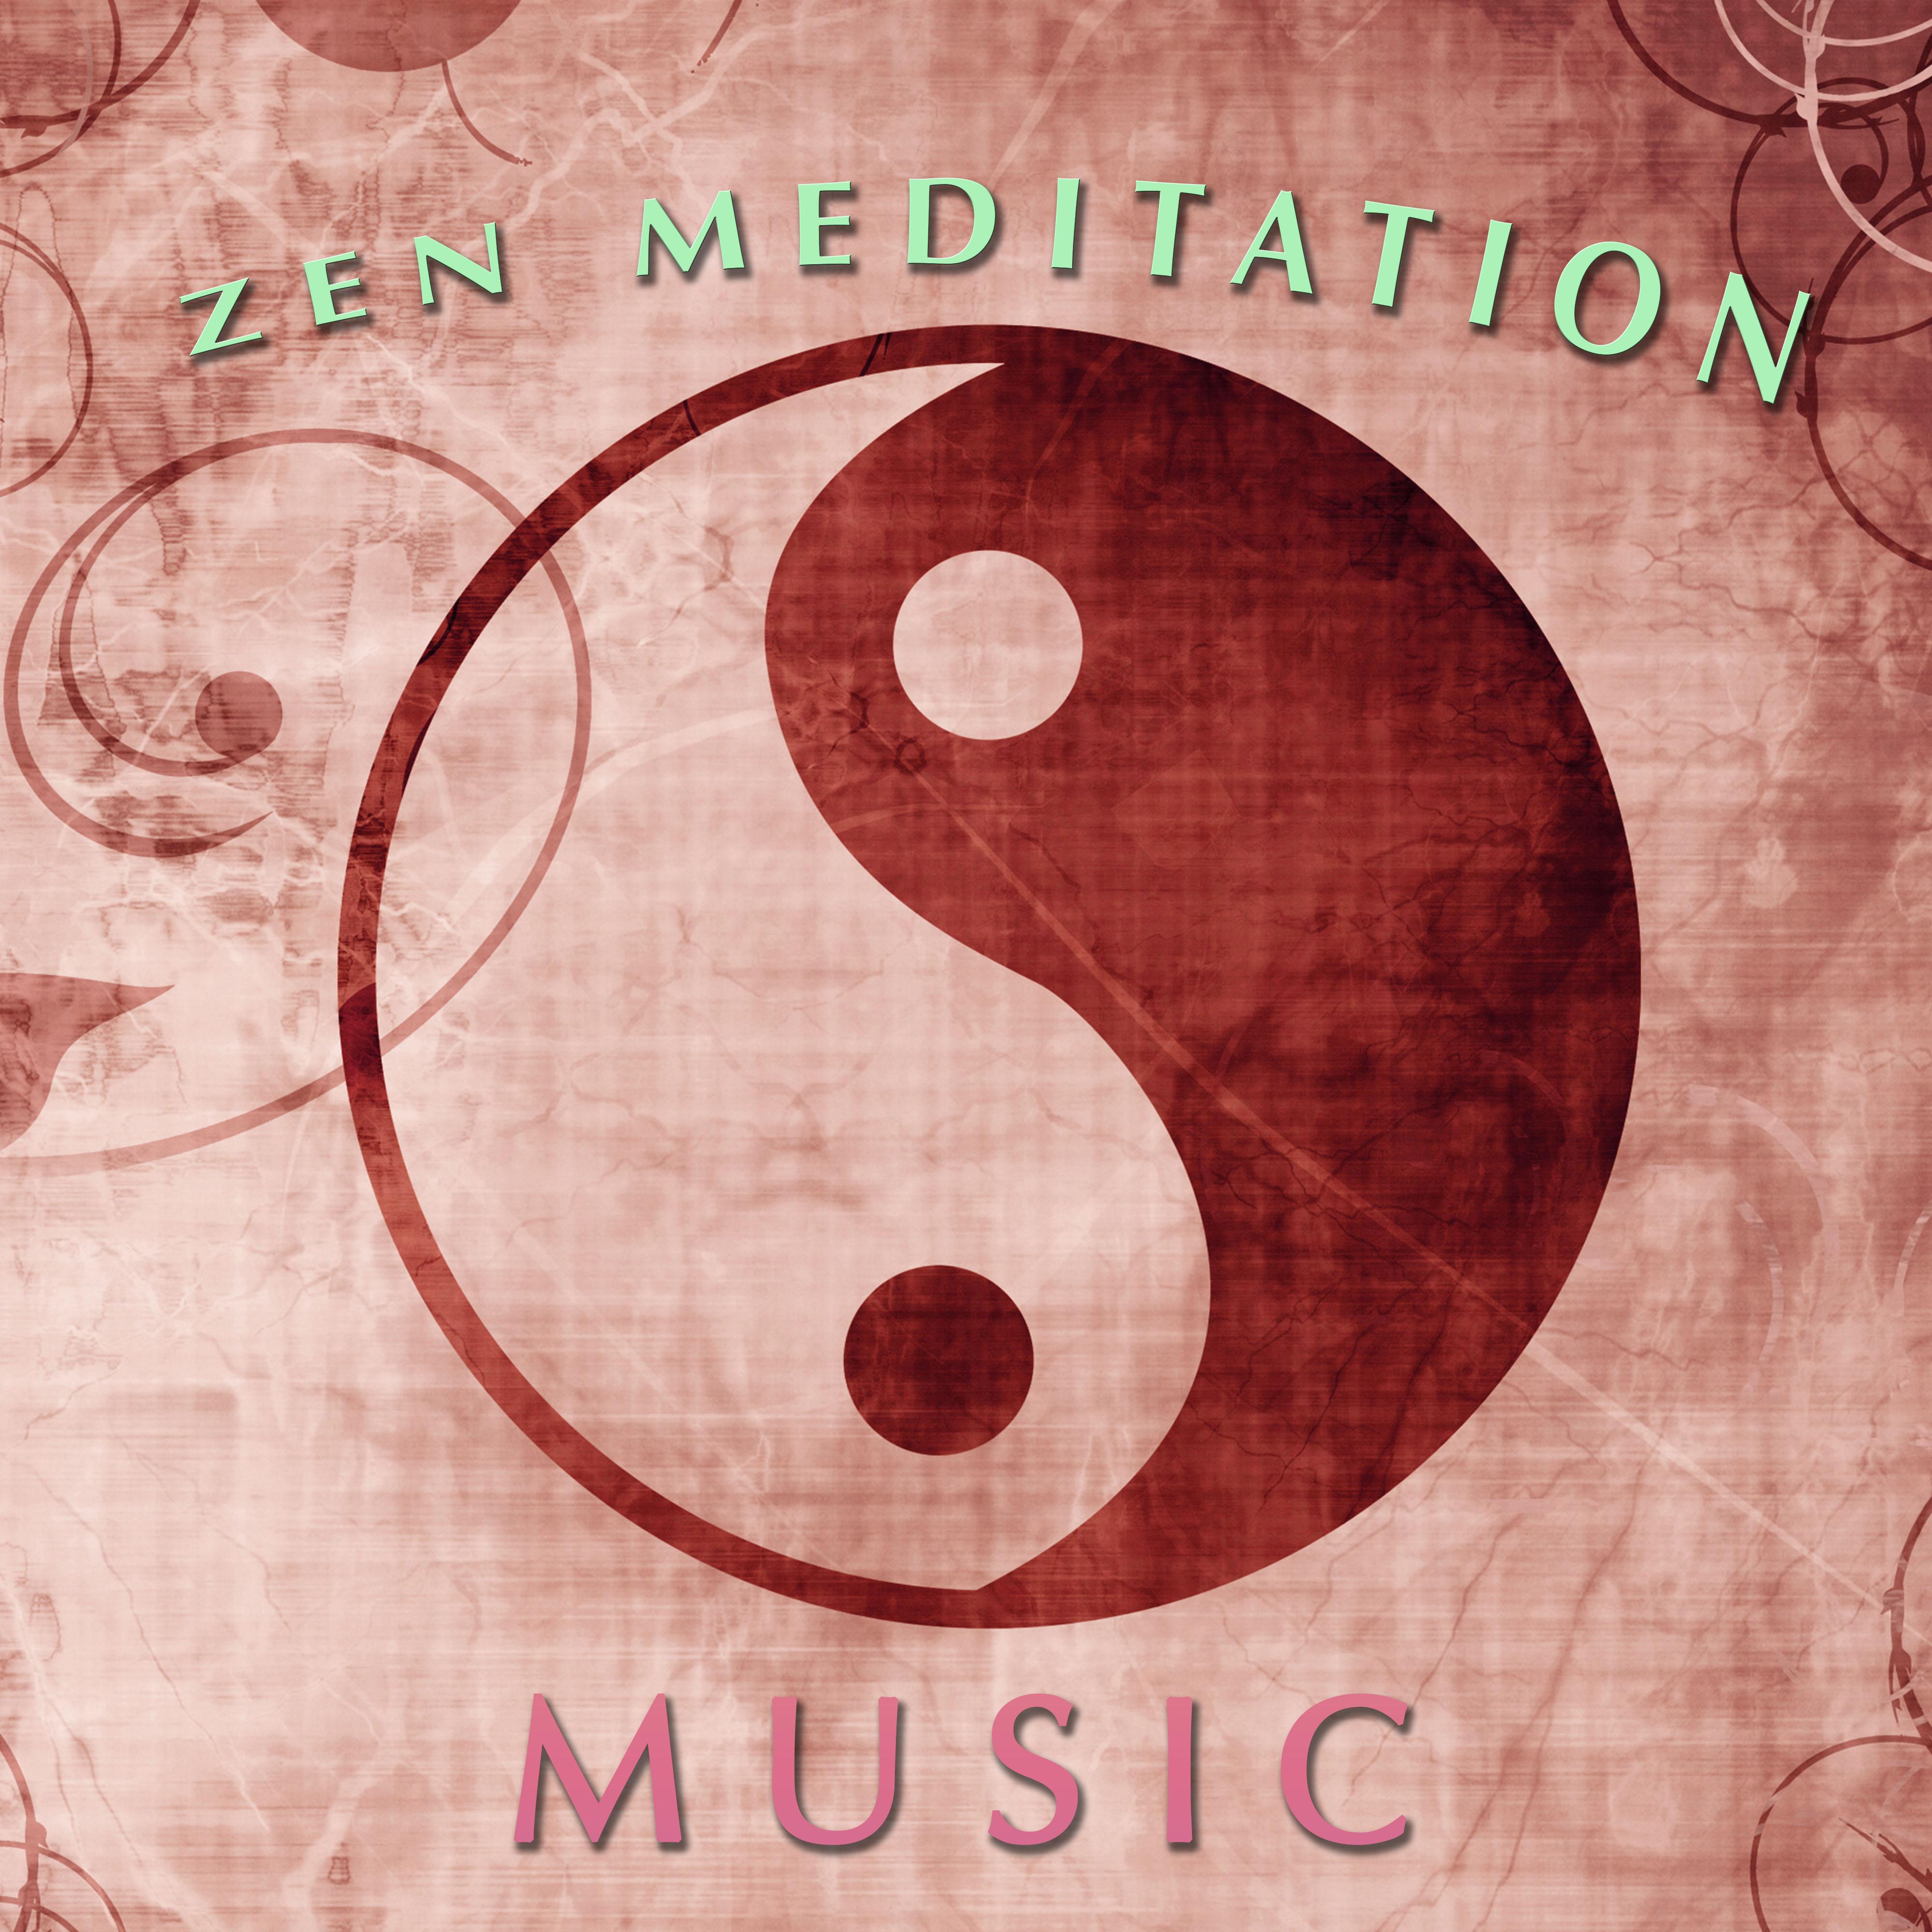 Zen Meditation Music - Soothing Sounds to Help You Fall Asleep